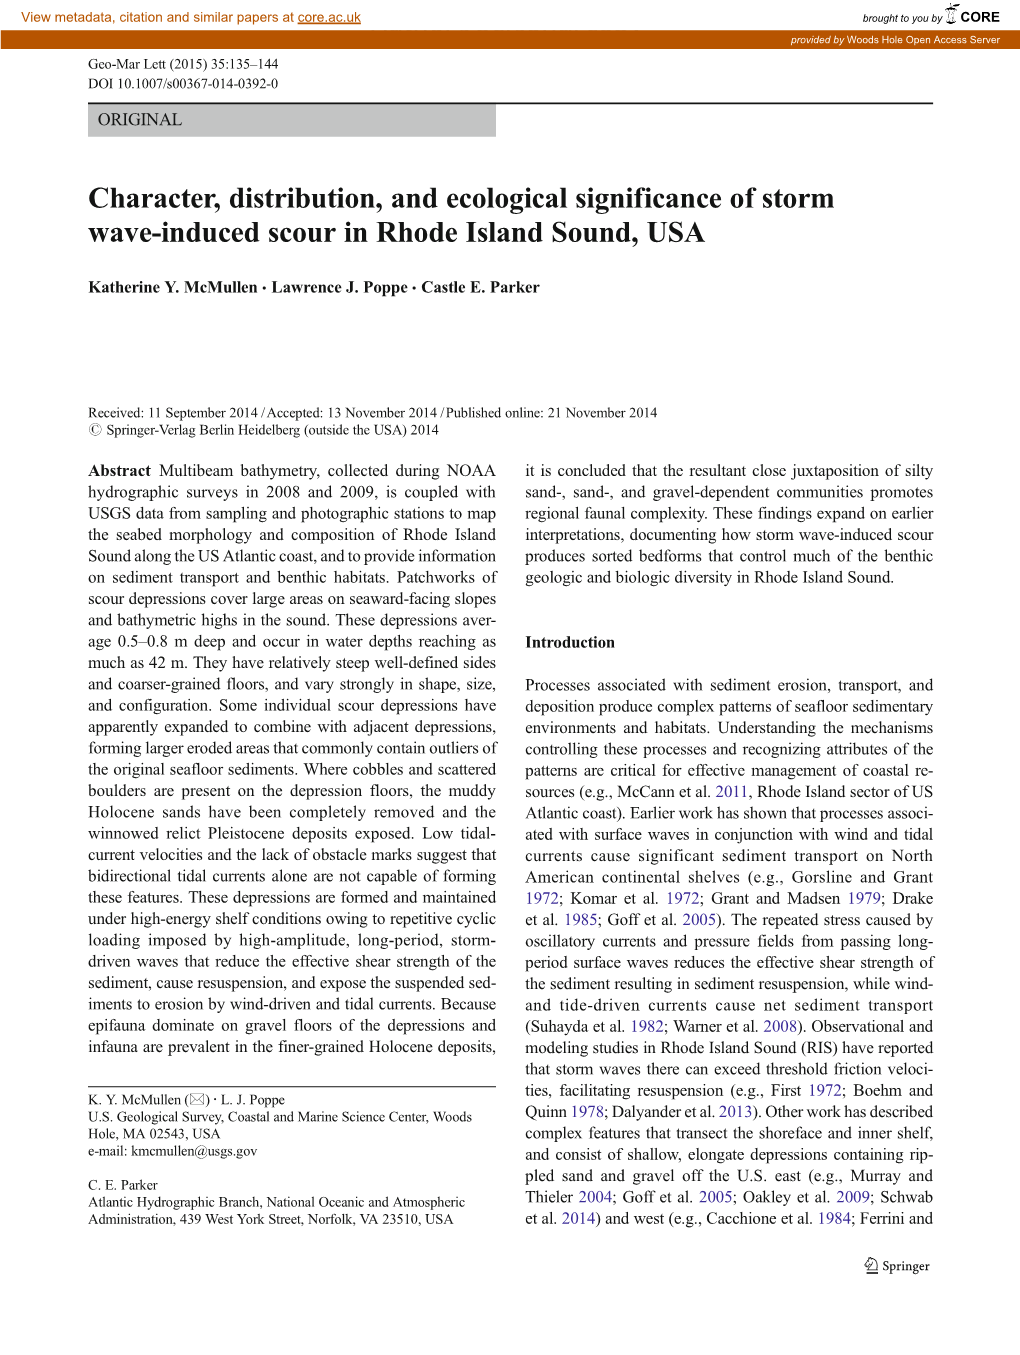 Character, Distribution, and Ecological Significance of Storm Wave-Induced Scour in Rhode Island Sound, USA